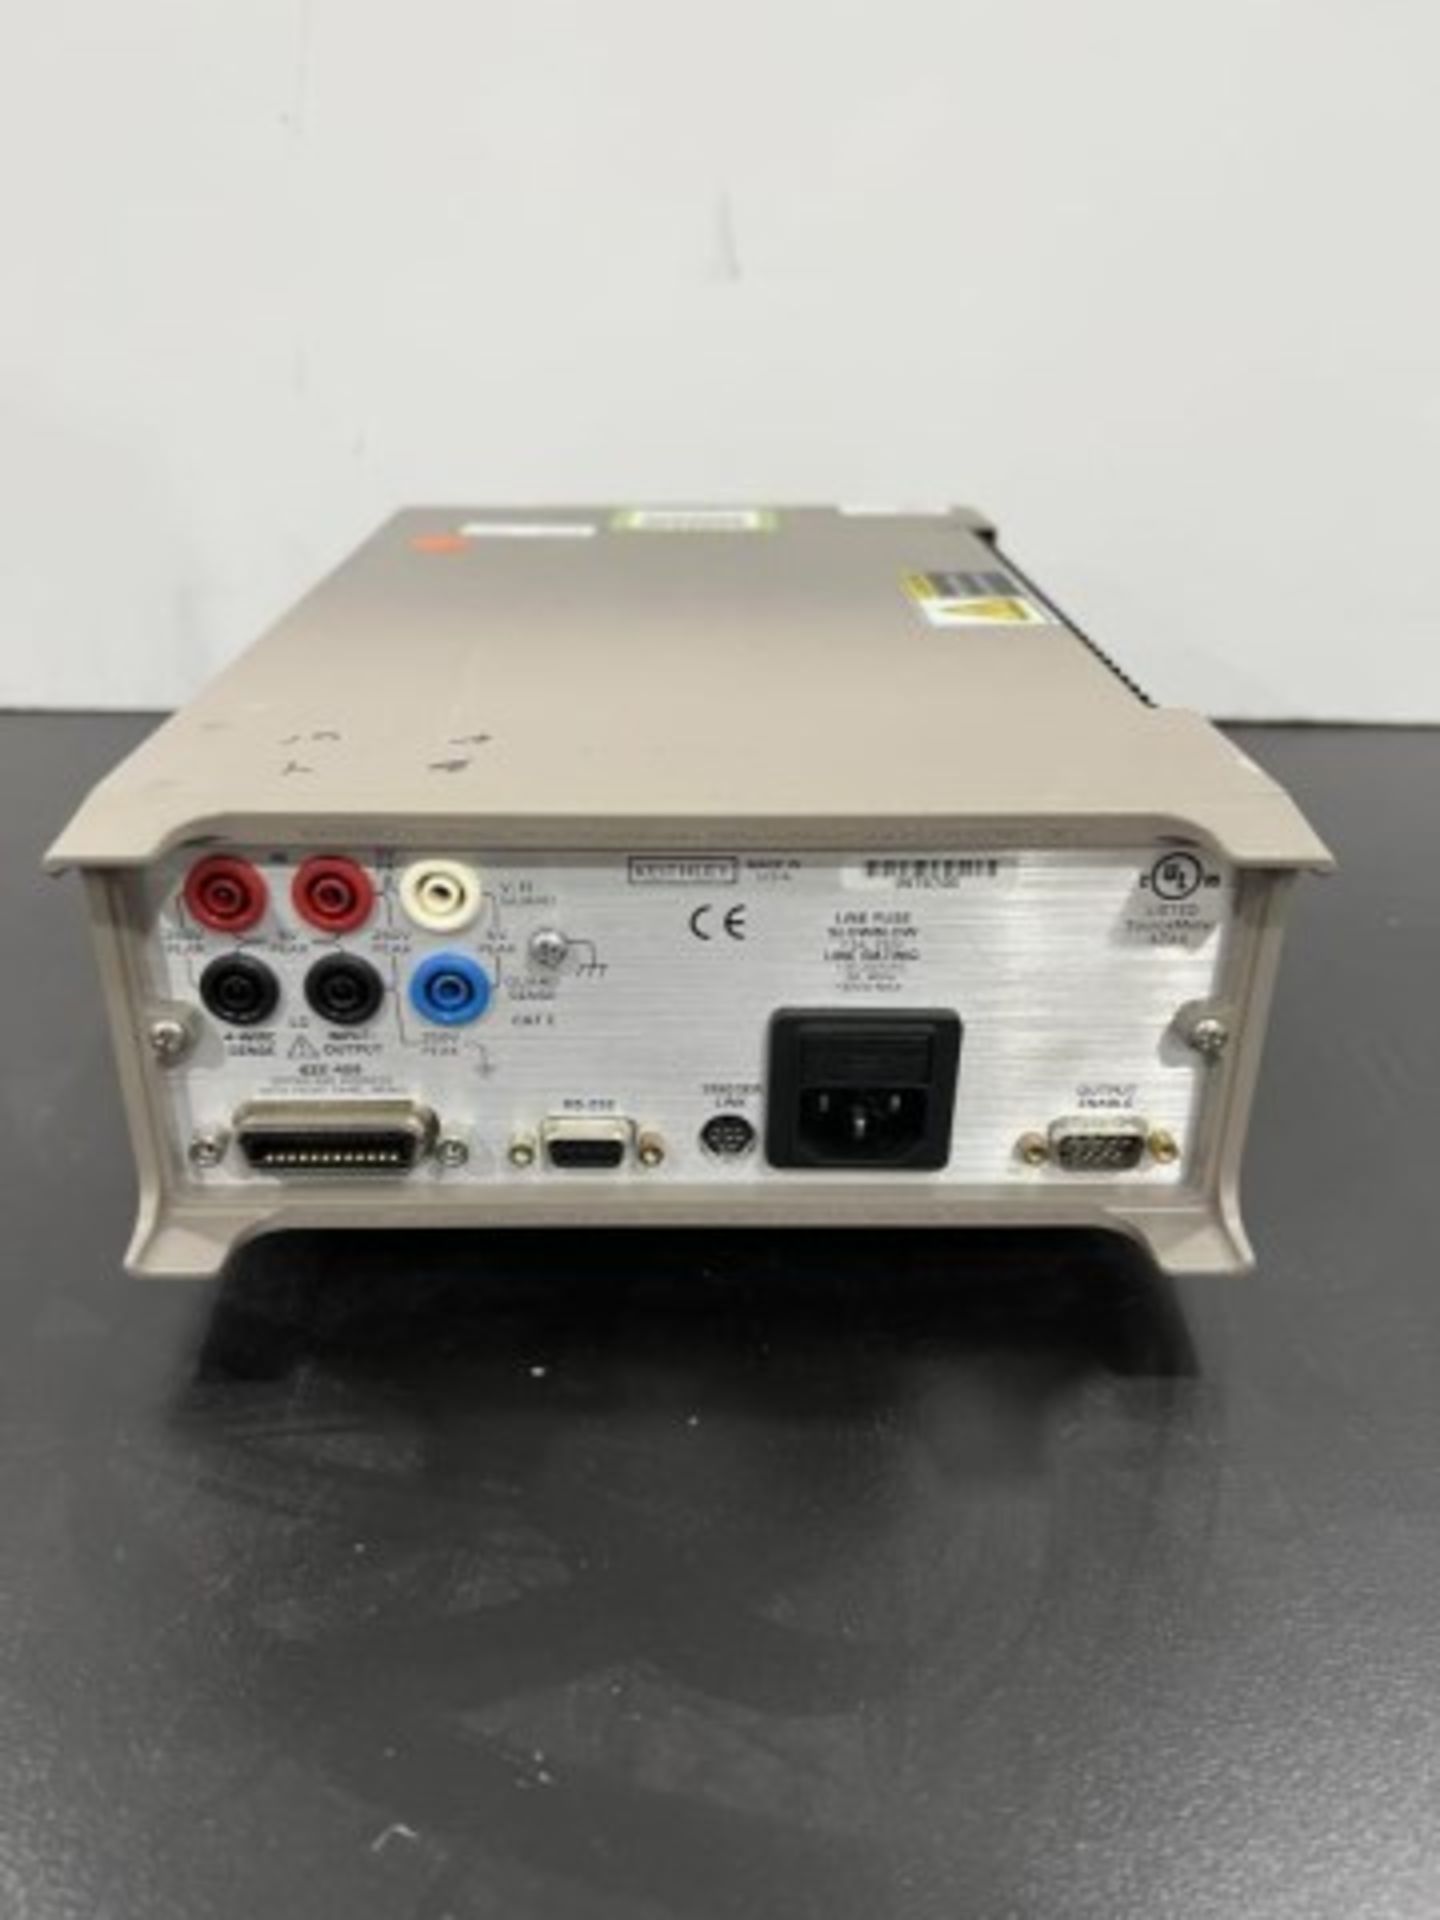 Keithley 2400 SourceMeter - Image 2 of 2